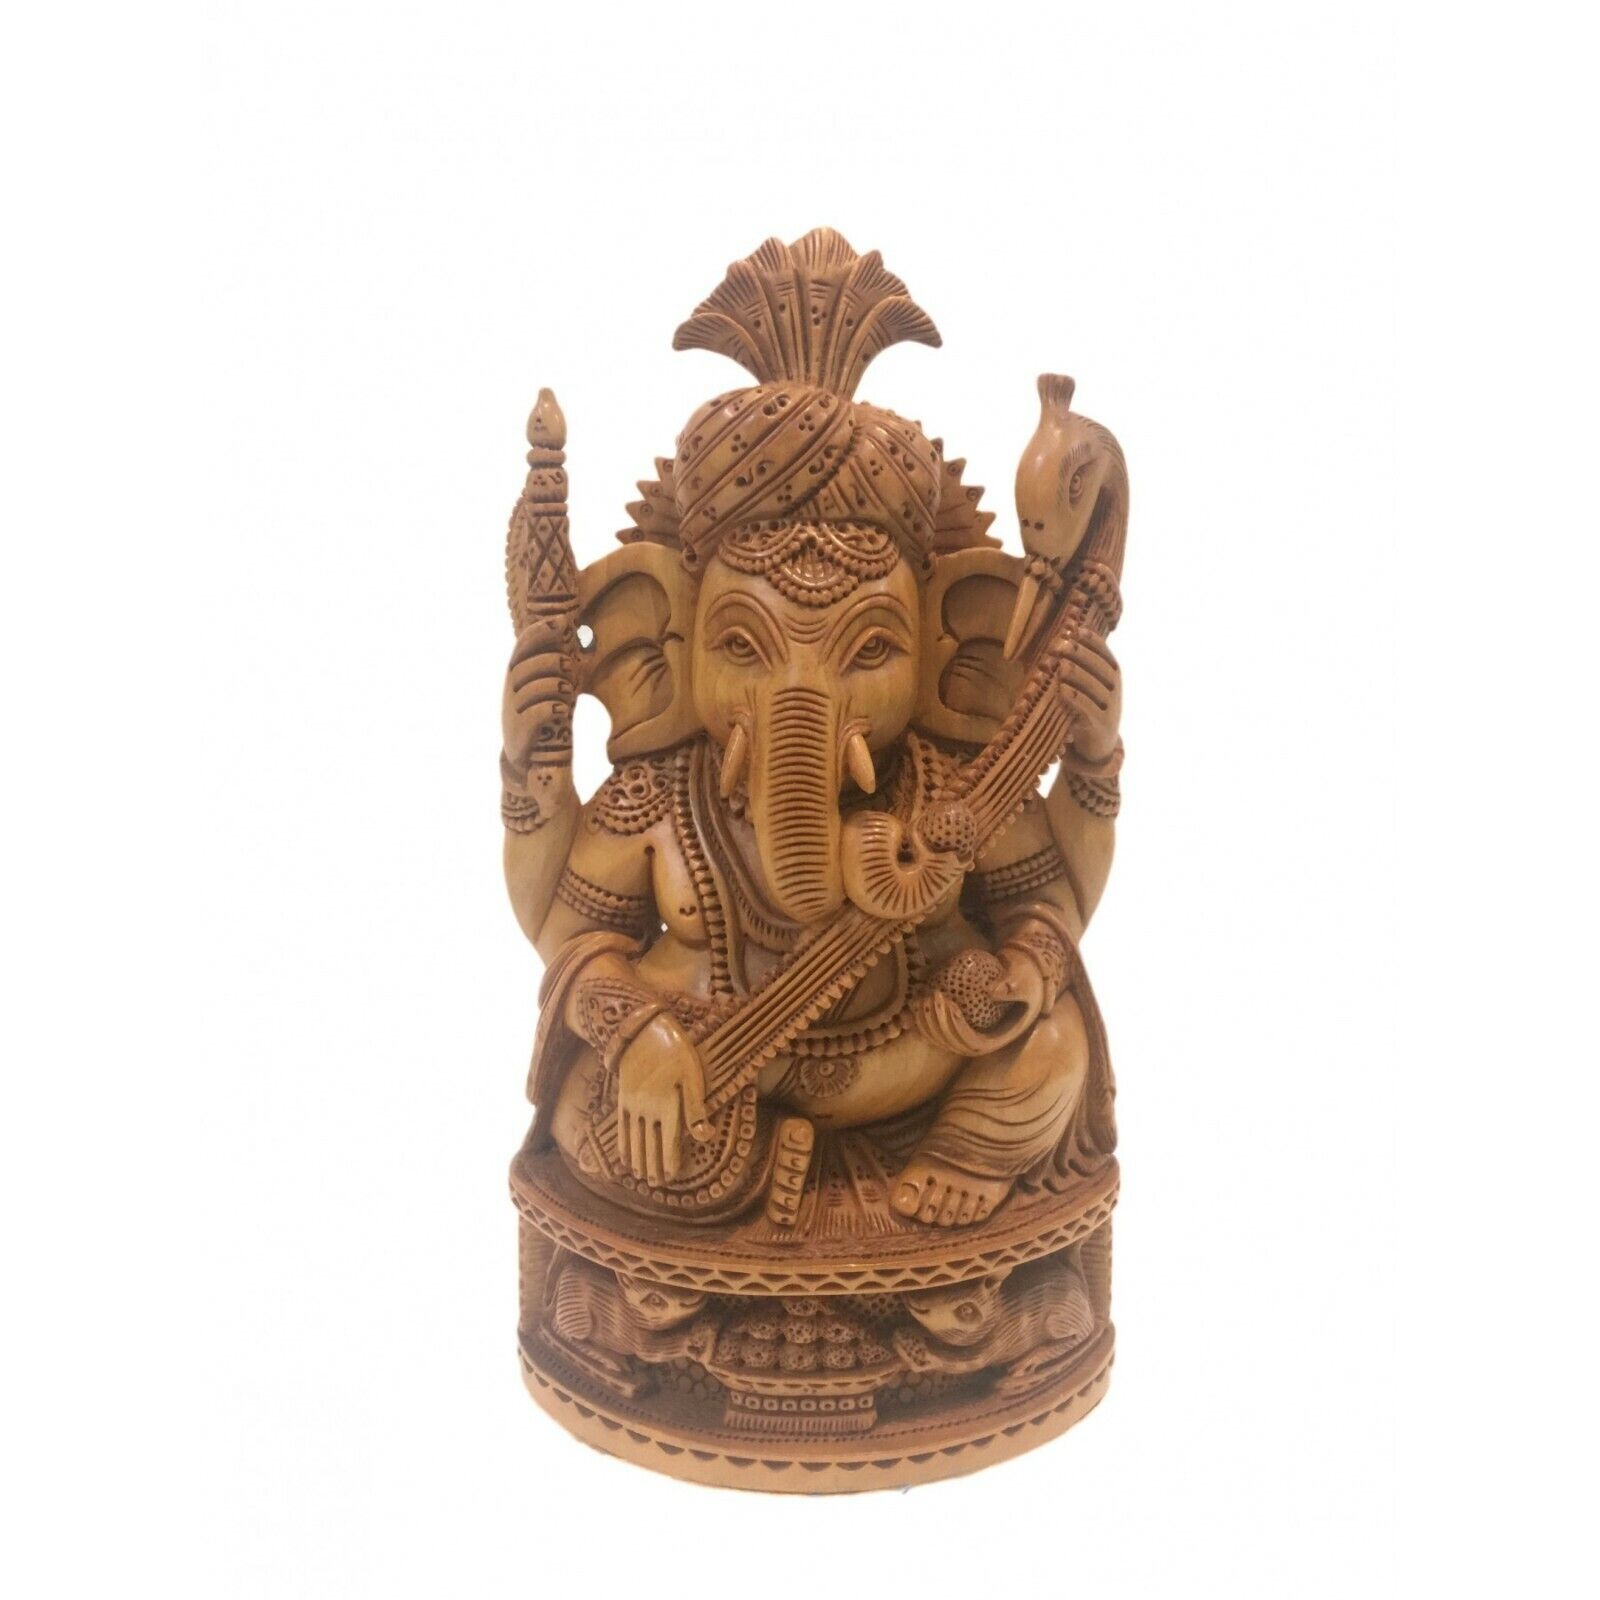 Beautiful Handcrafted Wooden Lord Ganesh / Ganesha With Pagdi Statue From India 